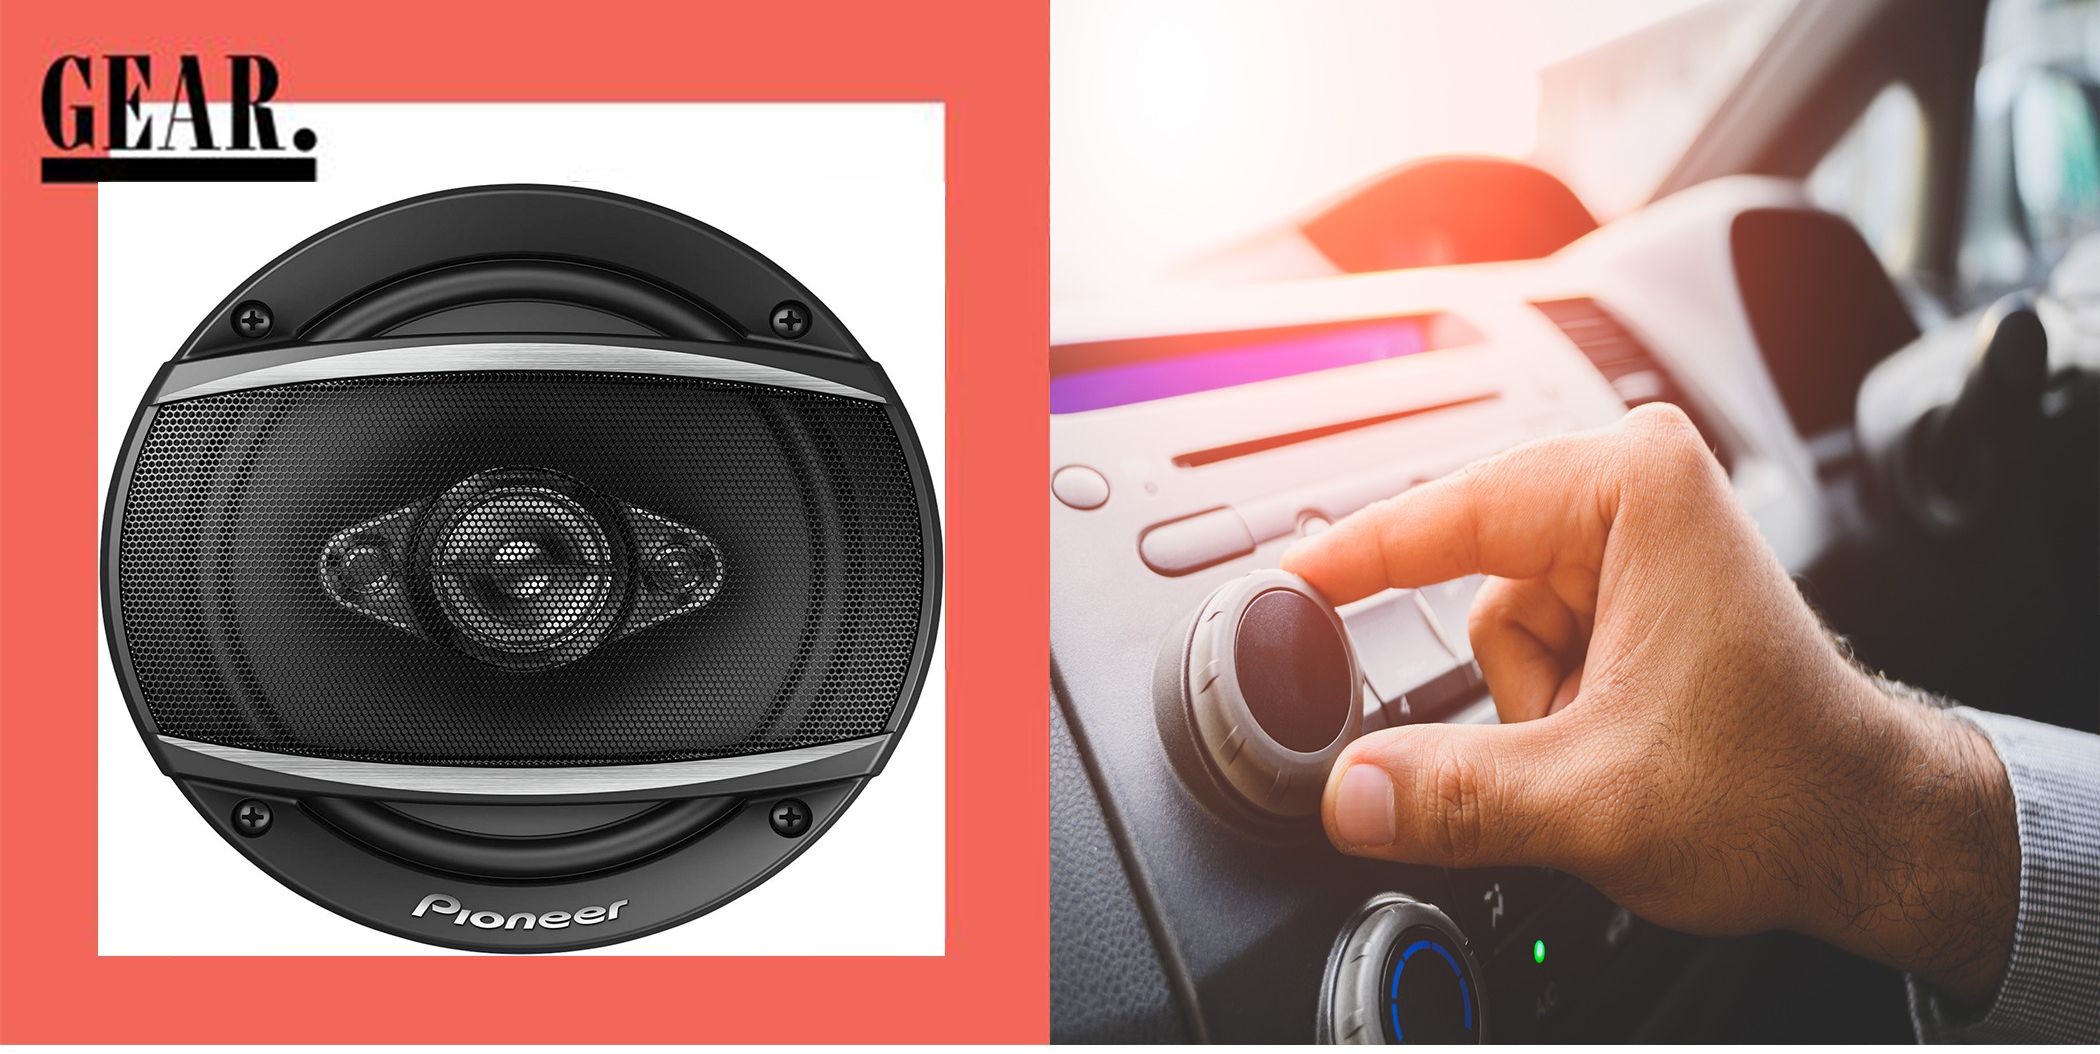 Turn It Up! The Best Car Speakers of 2023, According to an Expert